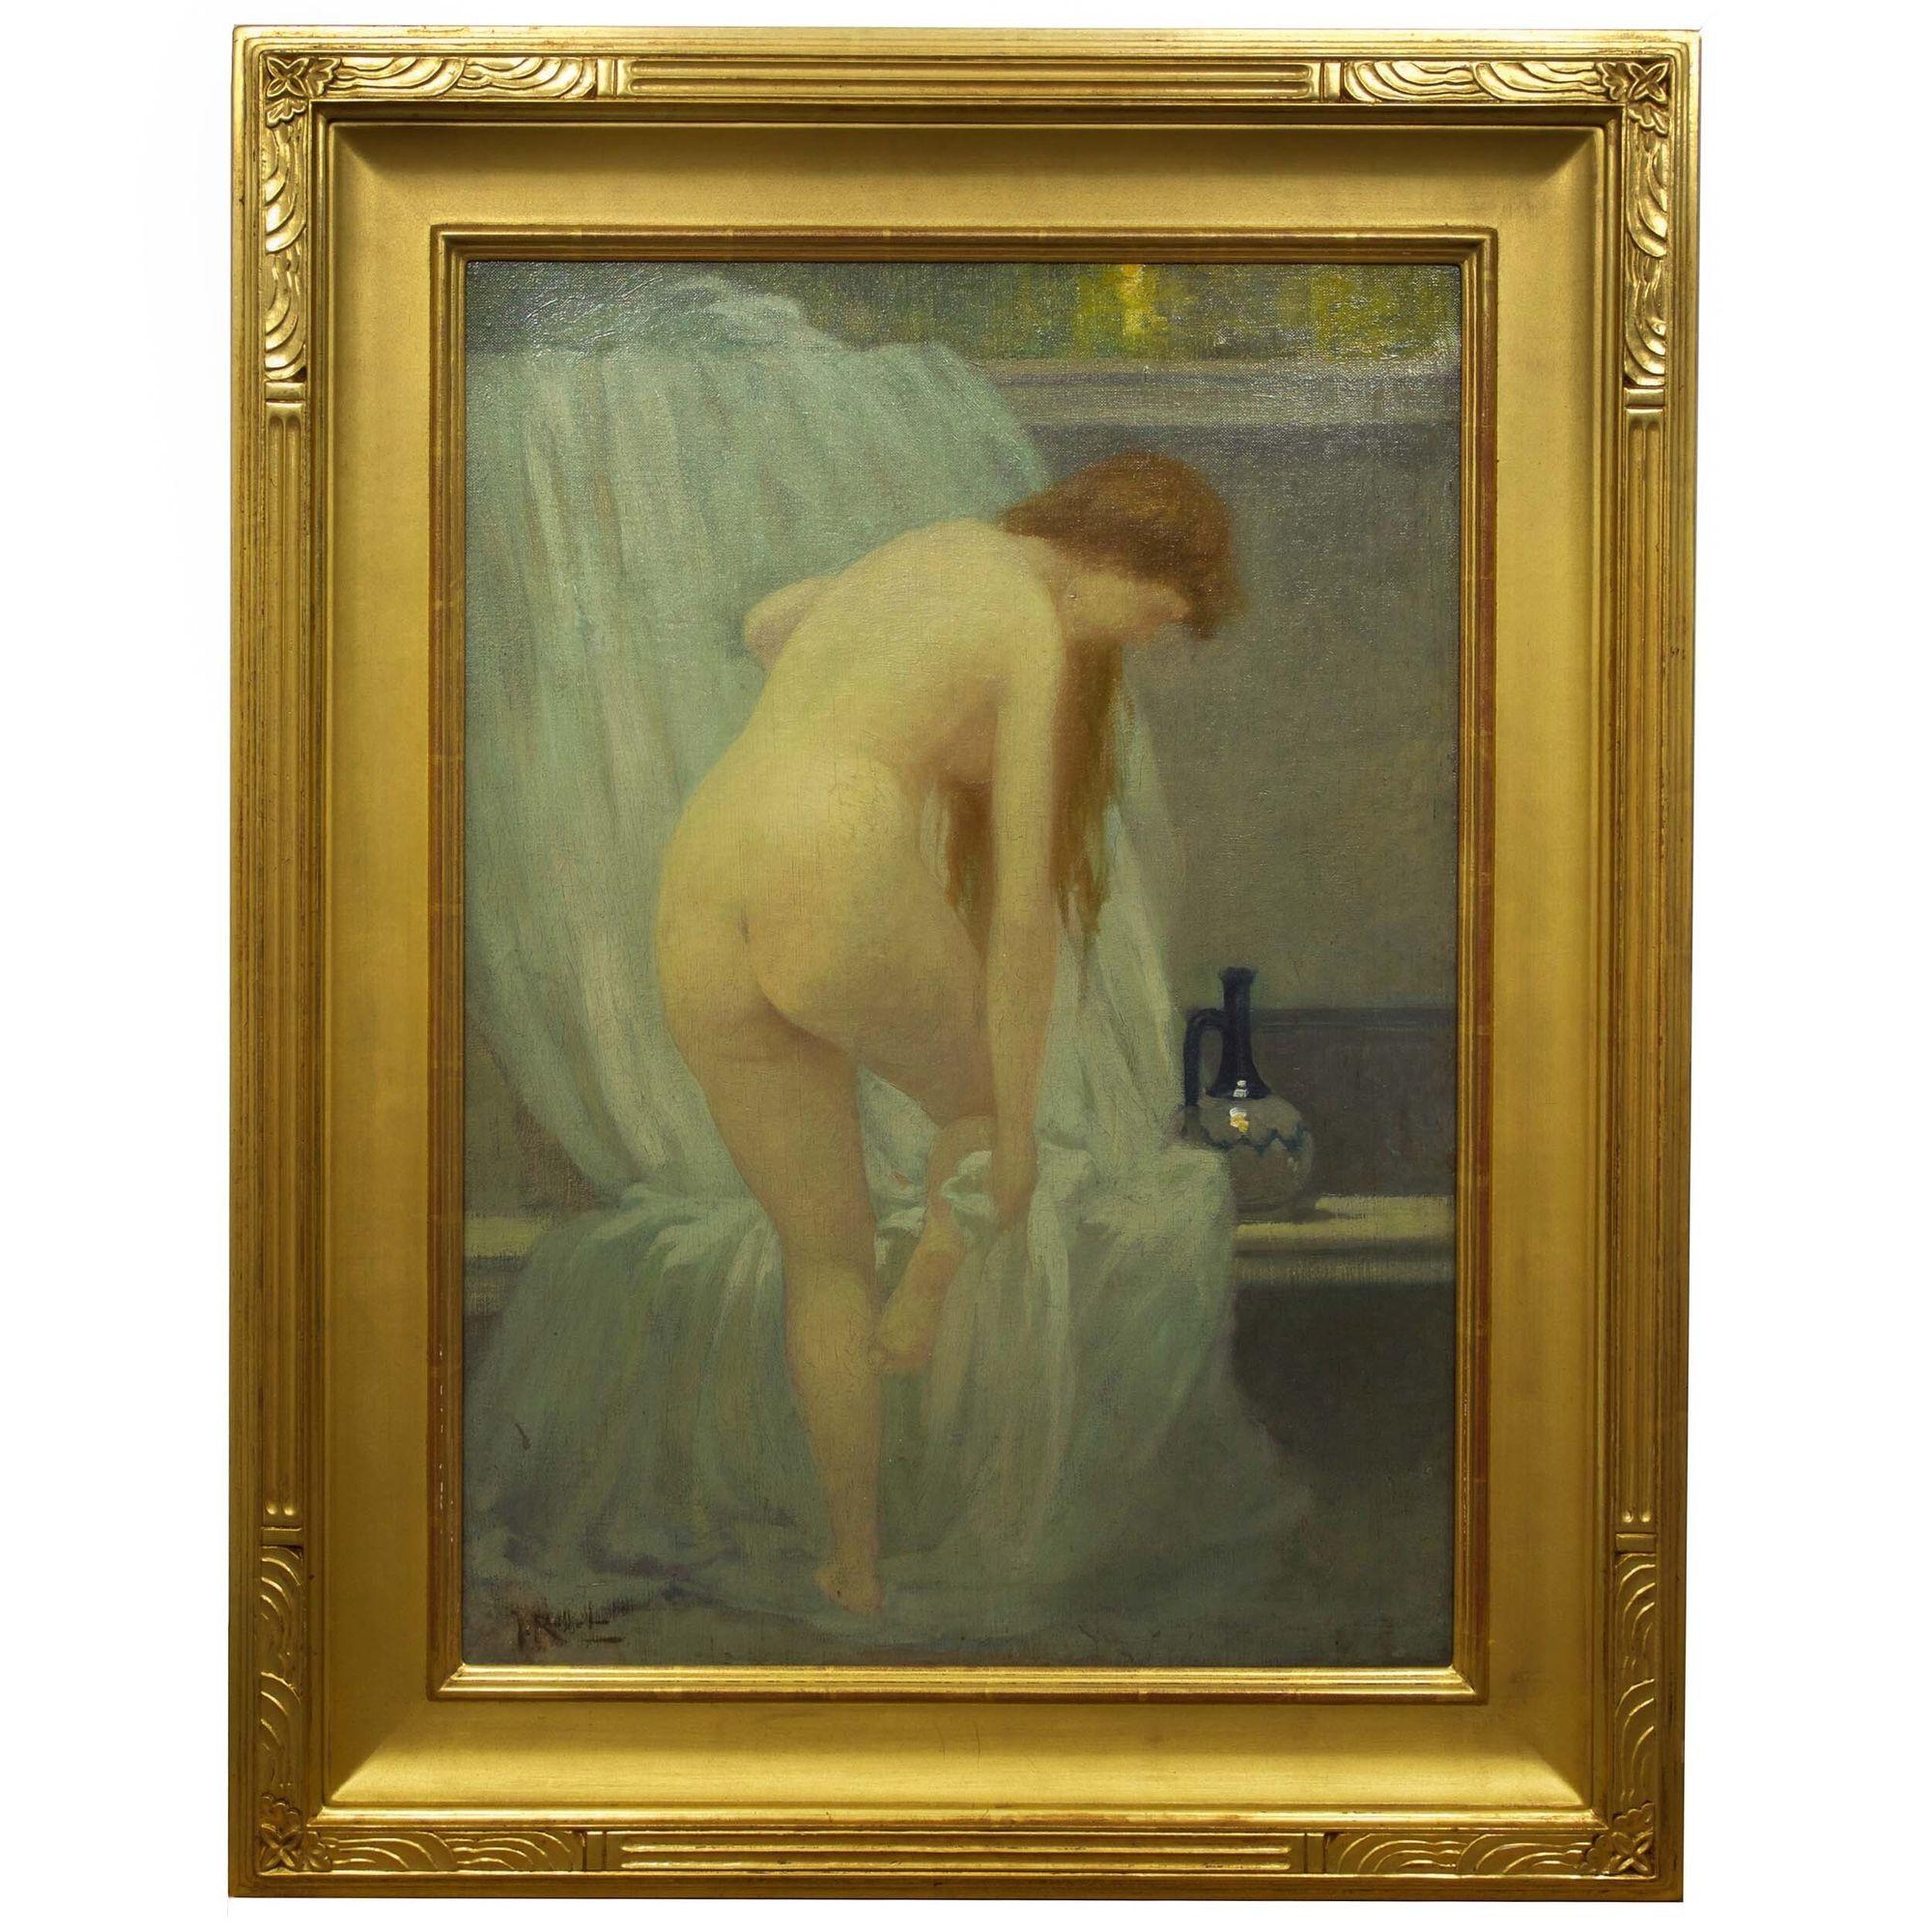 Romantic French School Tonal Painting of Bathing Woman, Early 20th Century